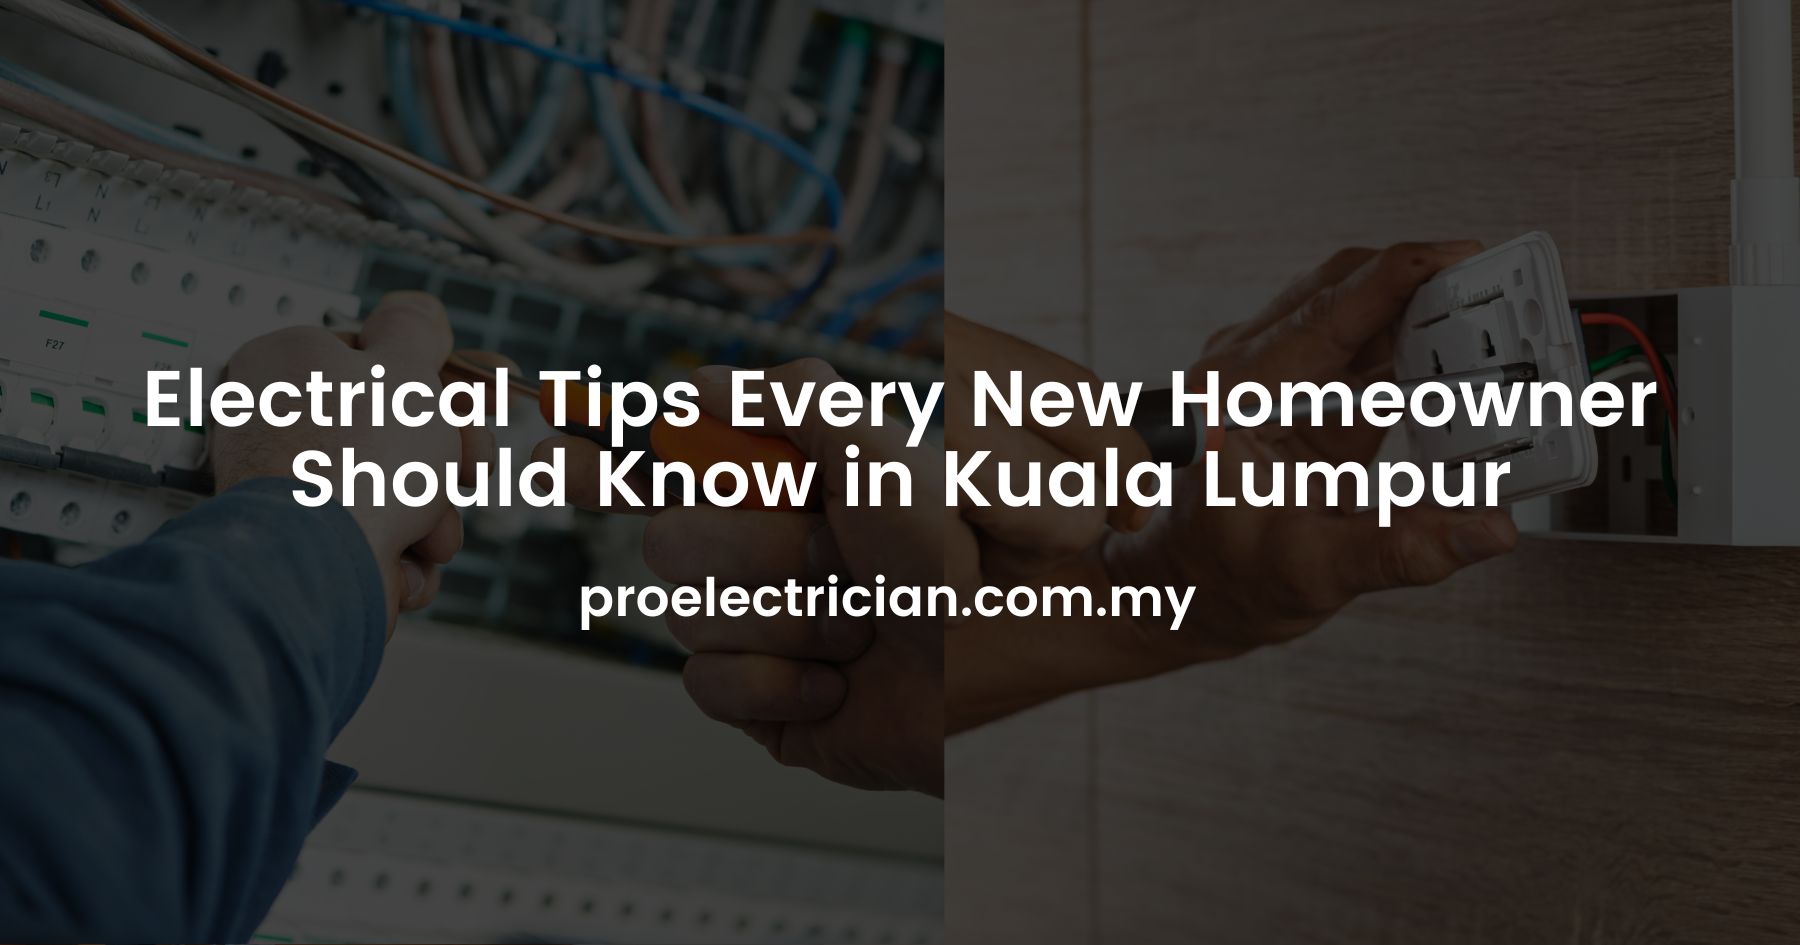 Electrical Tips Every New Homeowner Should Know in Kuala Lumpur